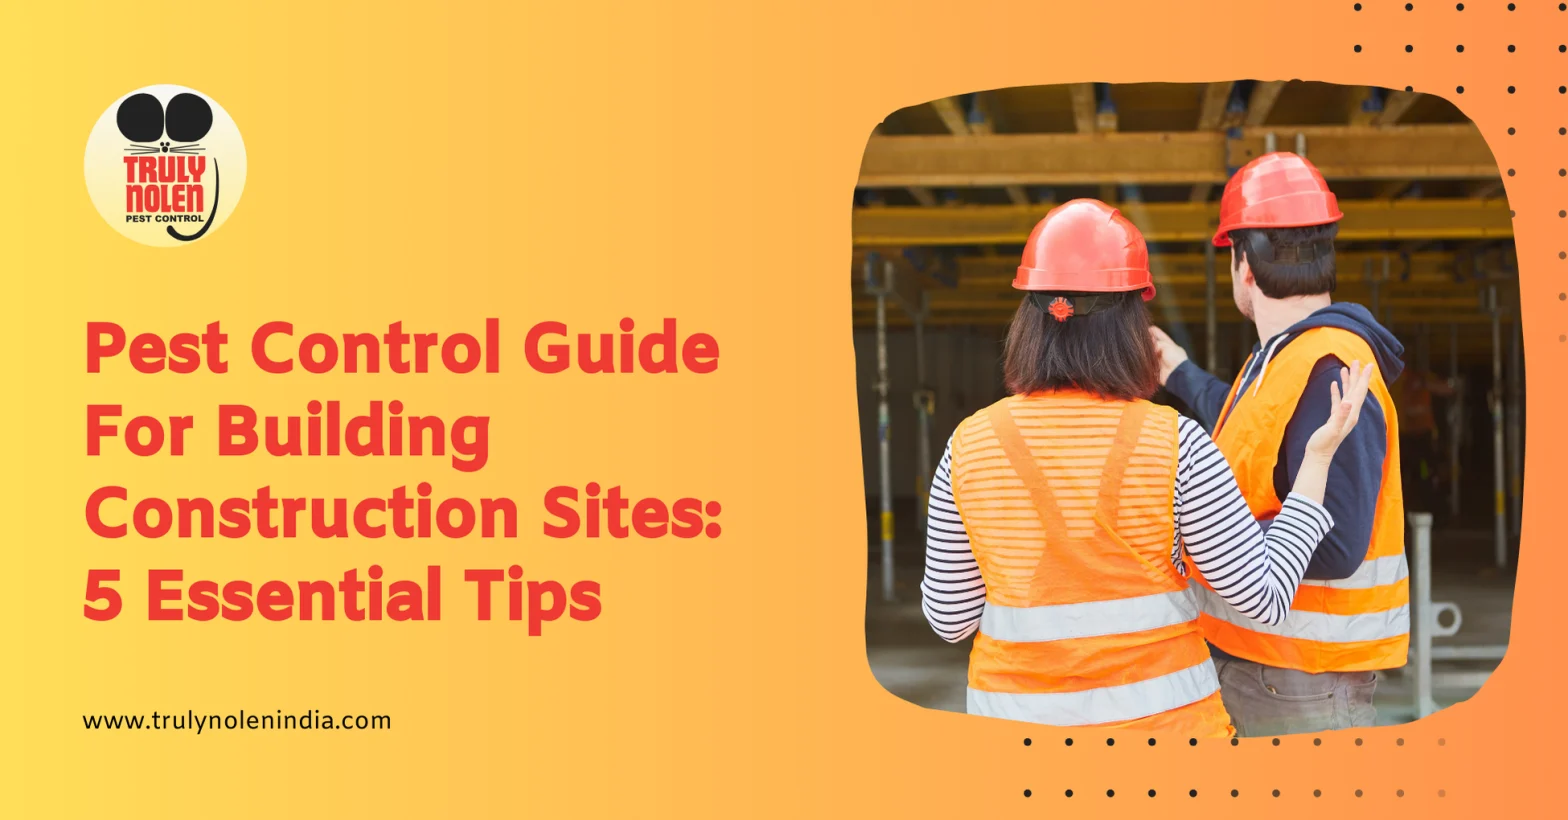 Pest Control Guide For Building Construction Sites: 5 Essential Tips